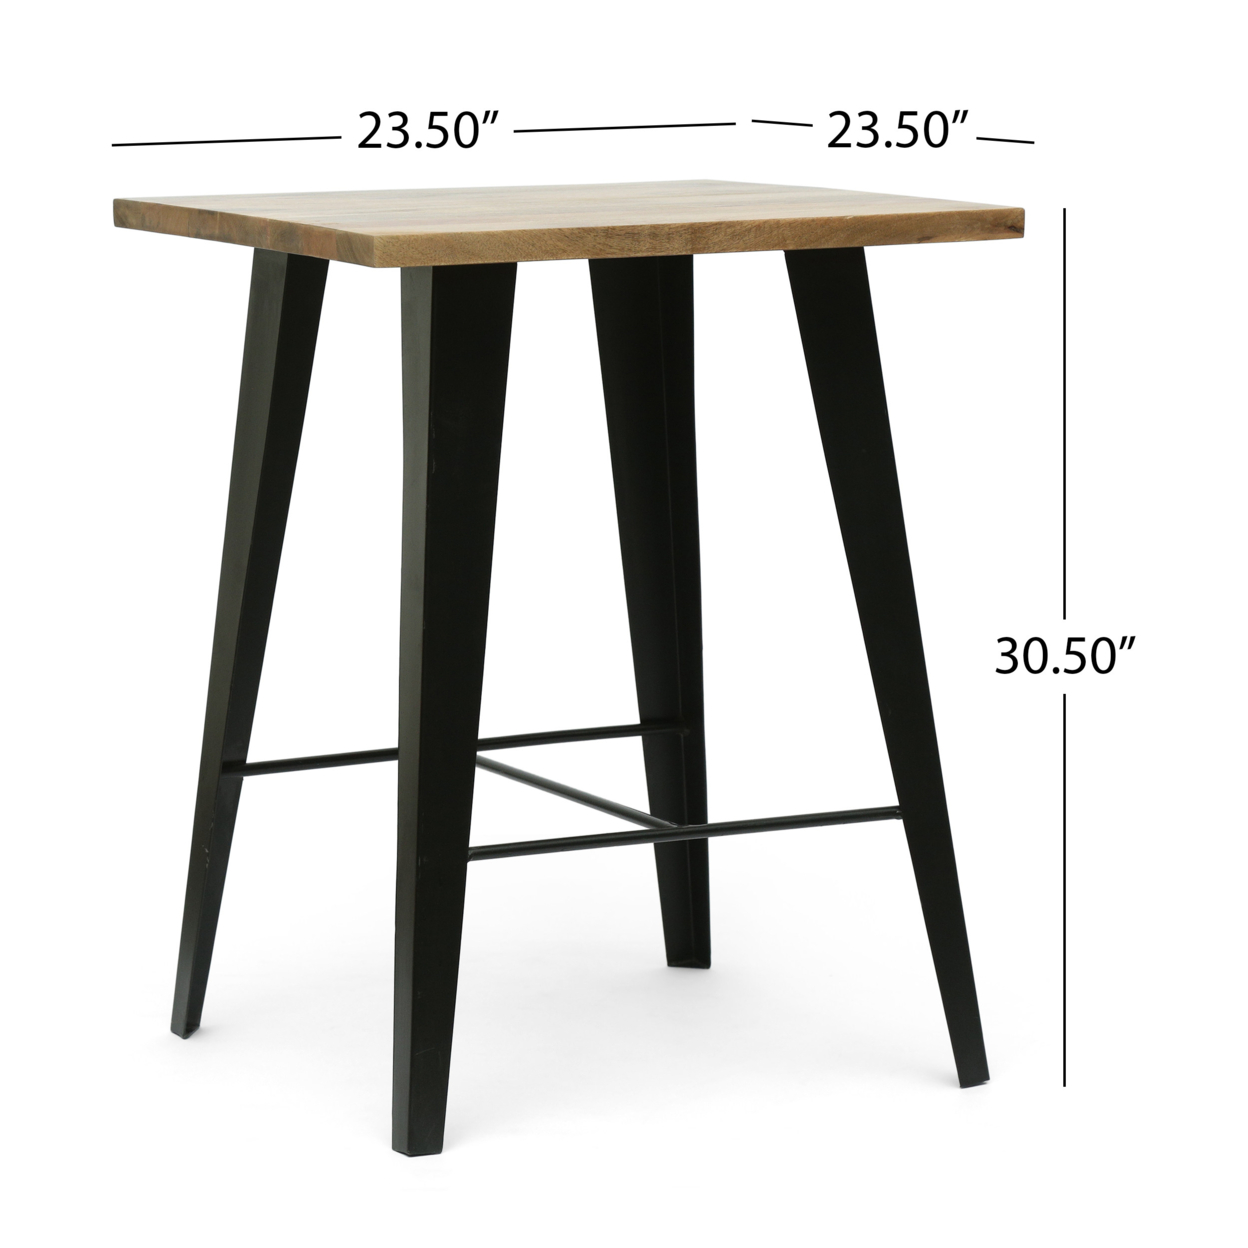 Muntz Handcrafted Modern Industrial Mango Wood Oversized Side Table, Natural And Black